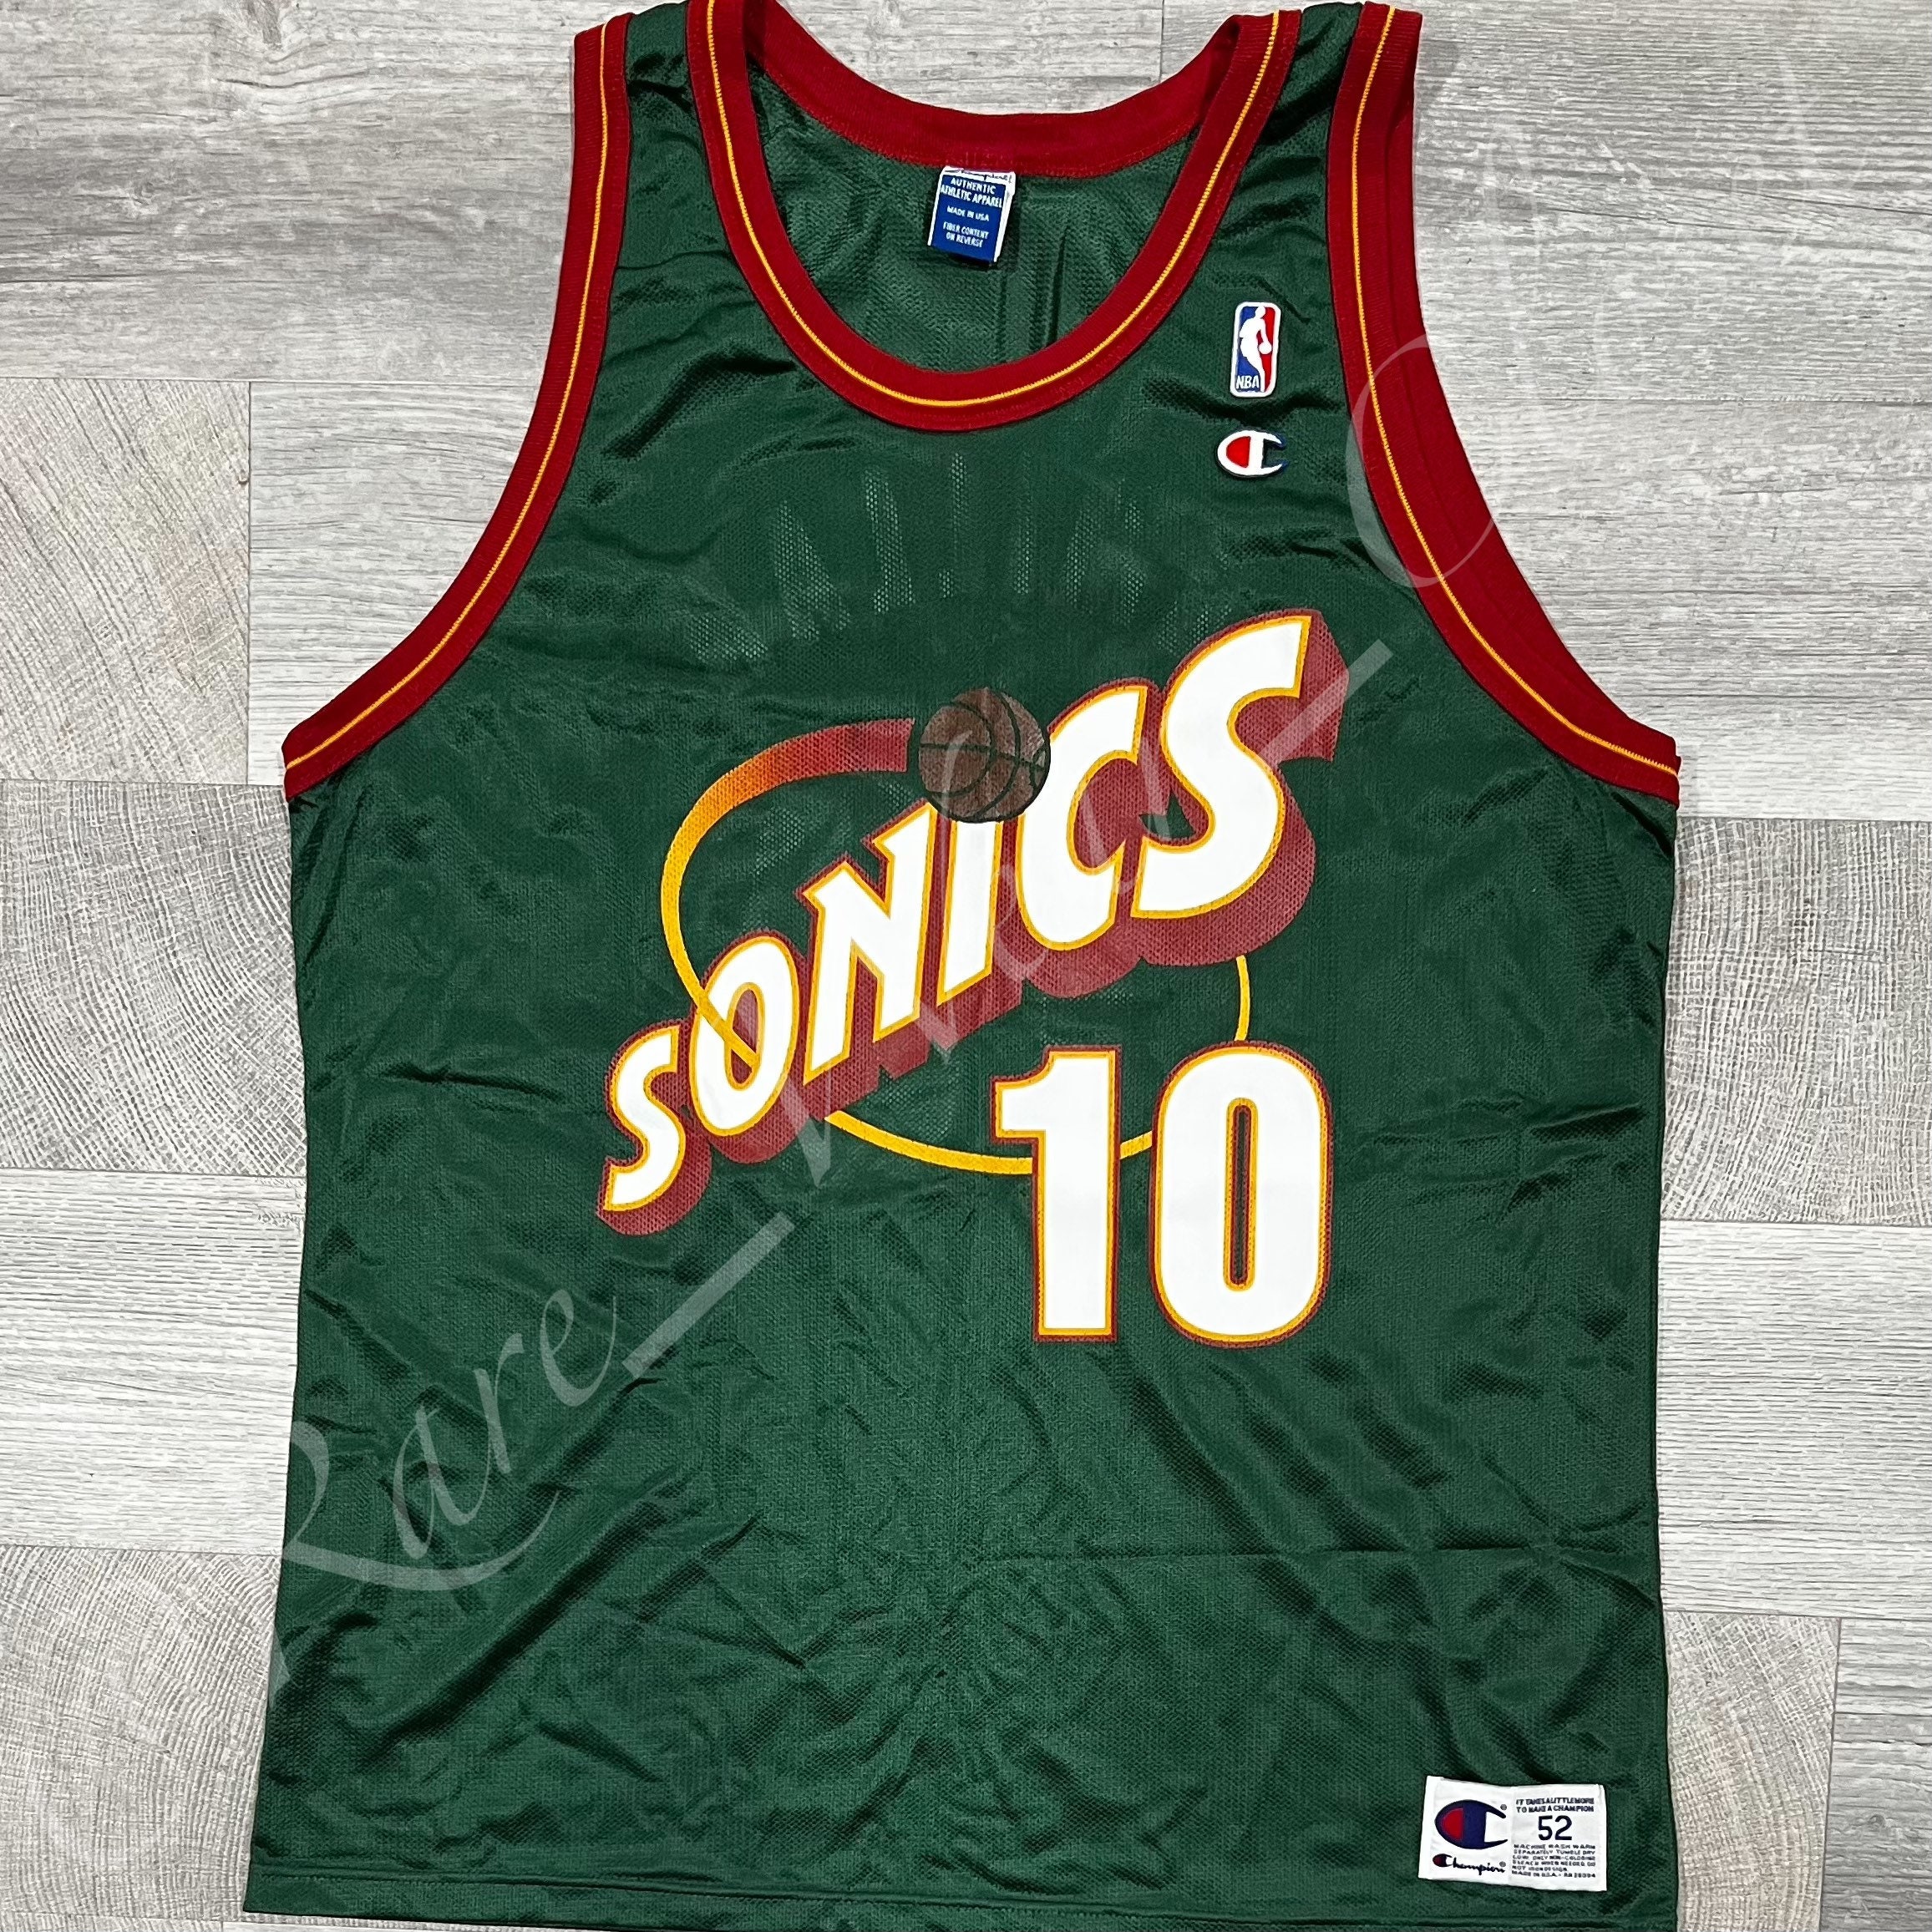 1996 NBA Finals Chicago Bulls vs Seattle Sonics Champs Shirt, hoodie,  sweater, long sleeve and tank top